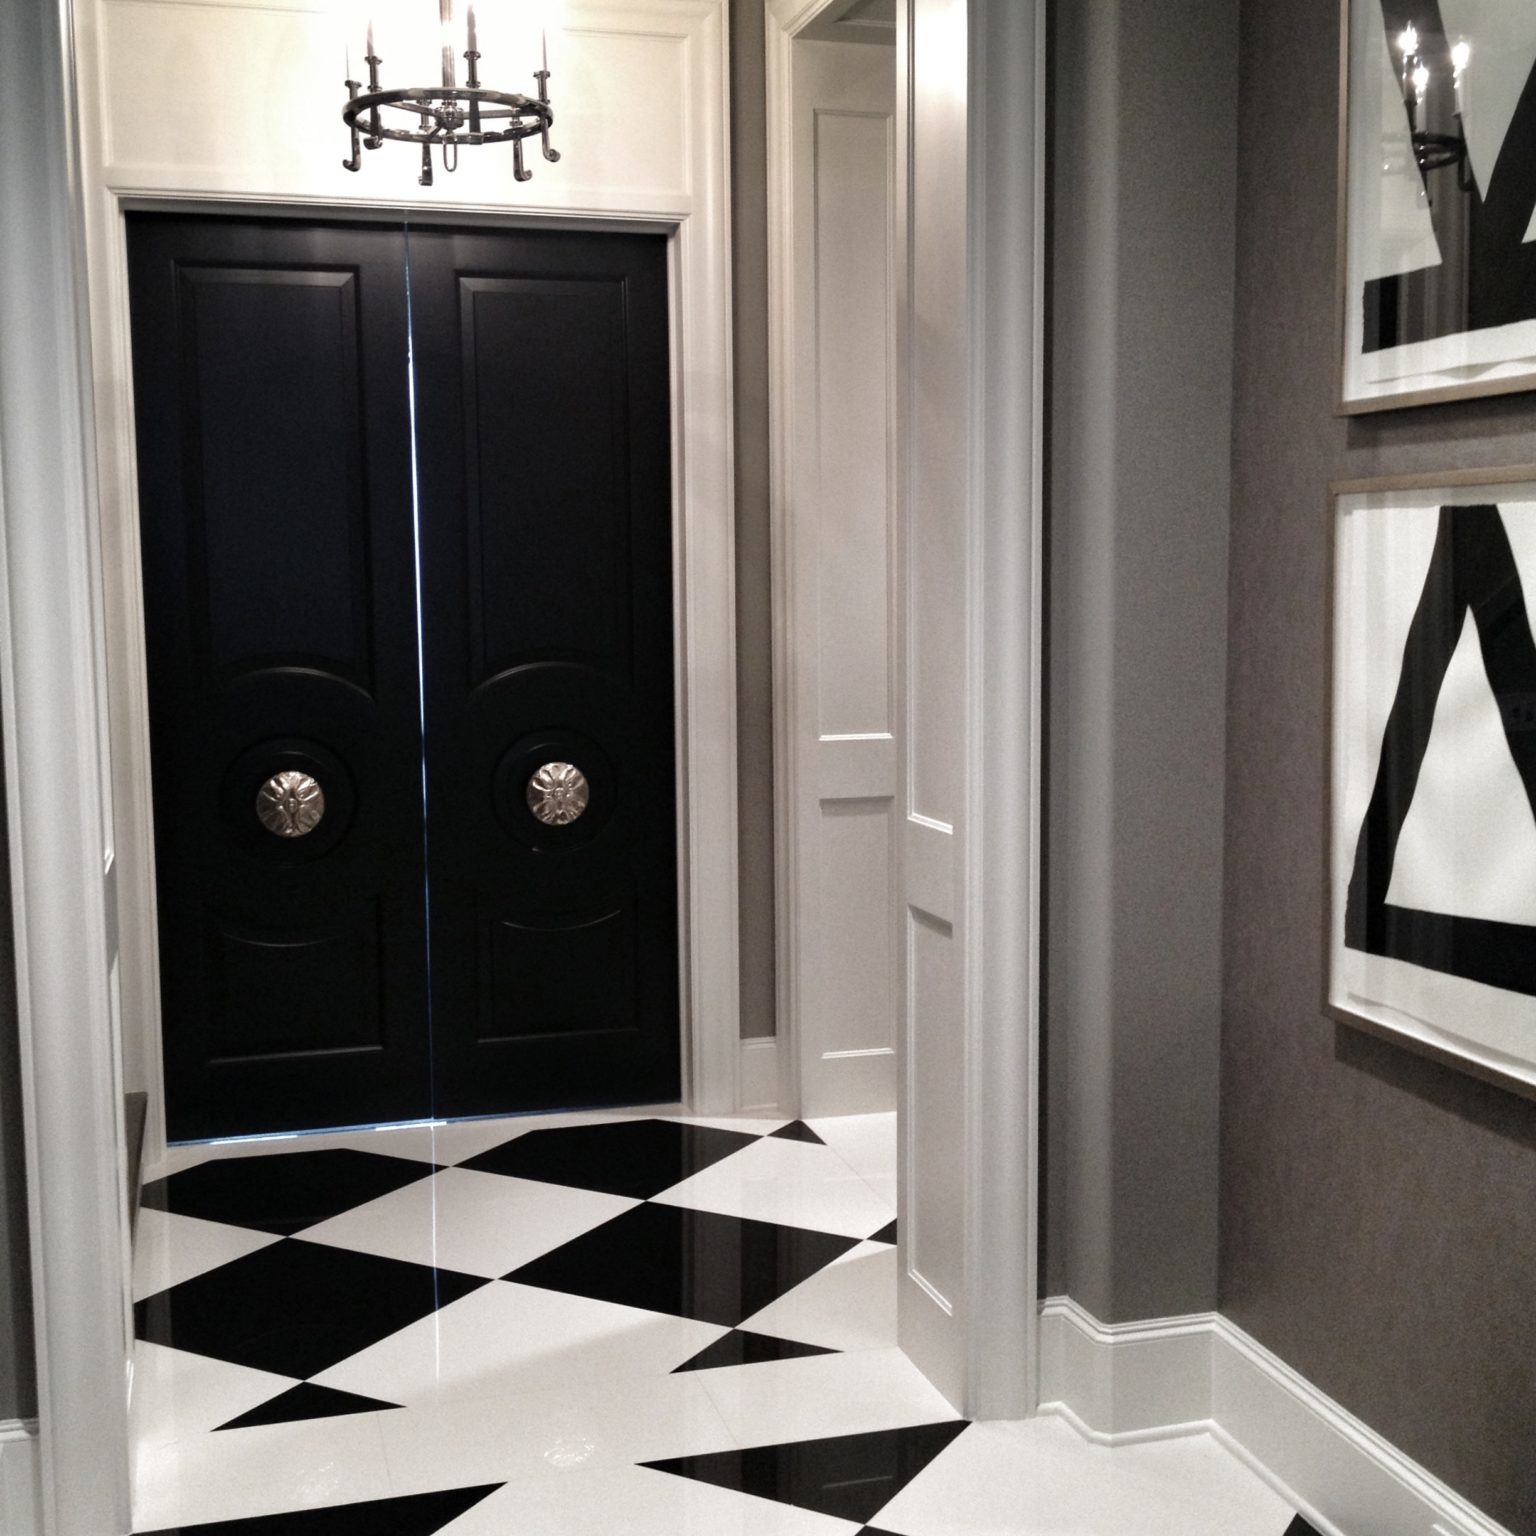 Black and white entryway design